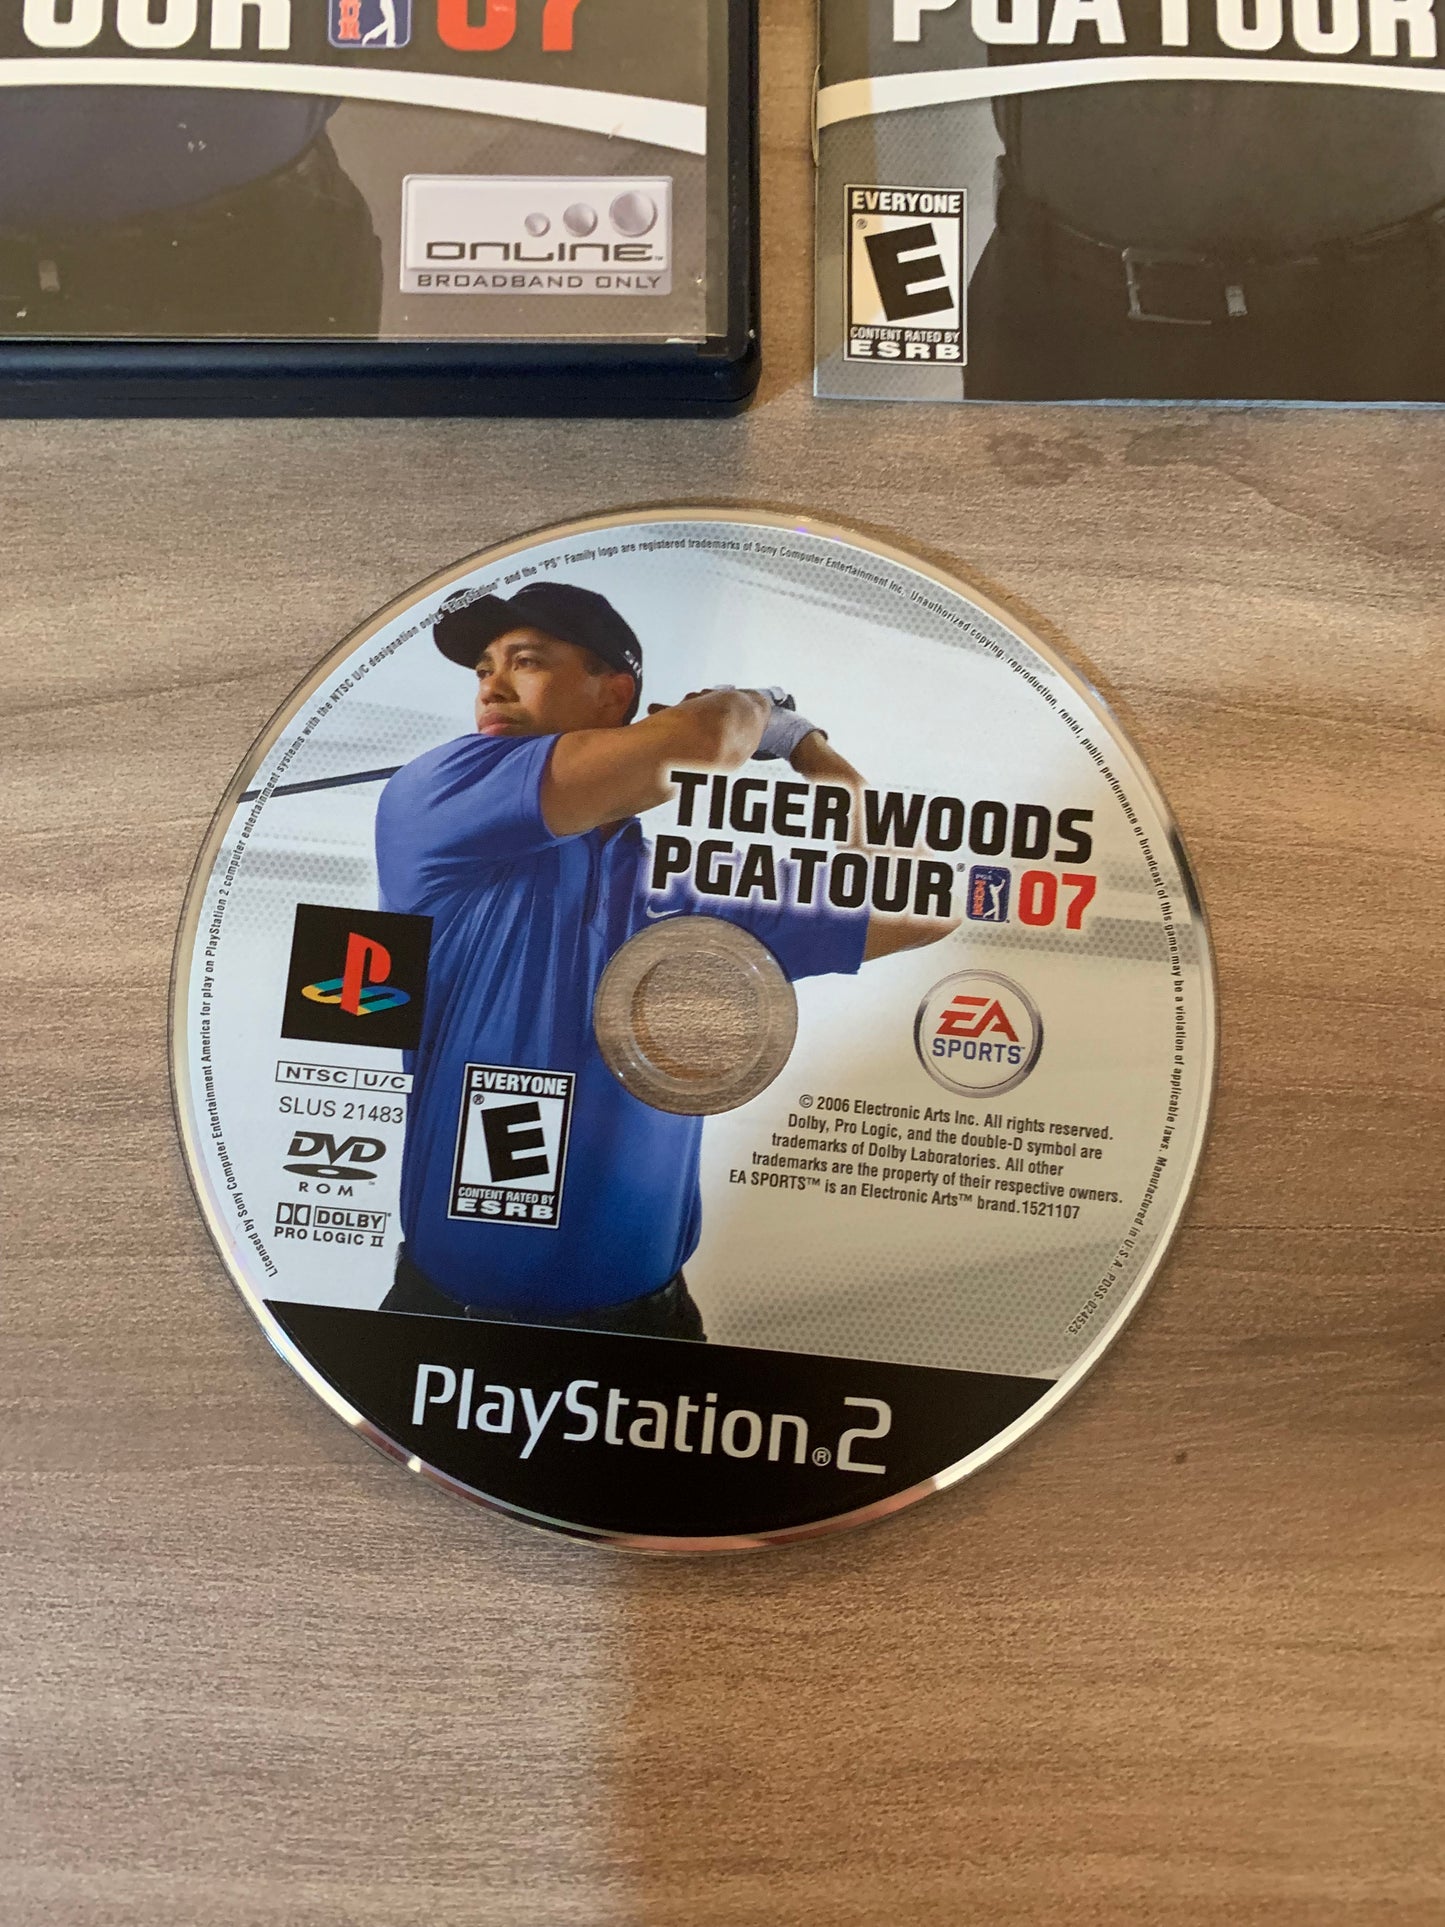 SONY PLAYSTATiON 2 [PS2] | TiGER WOODS PGA TOUR 07